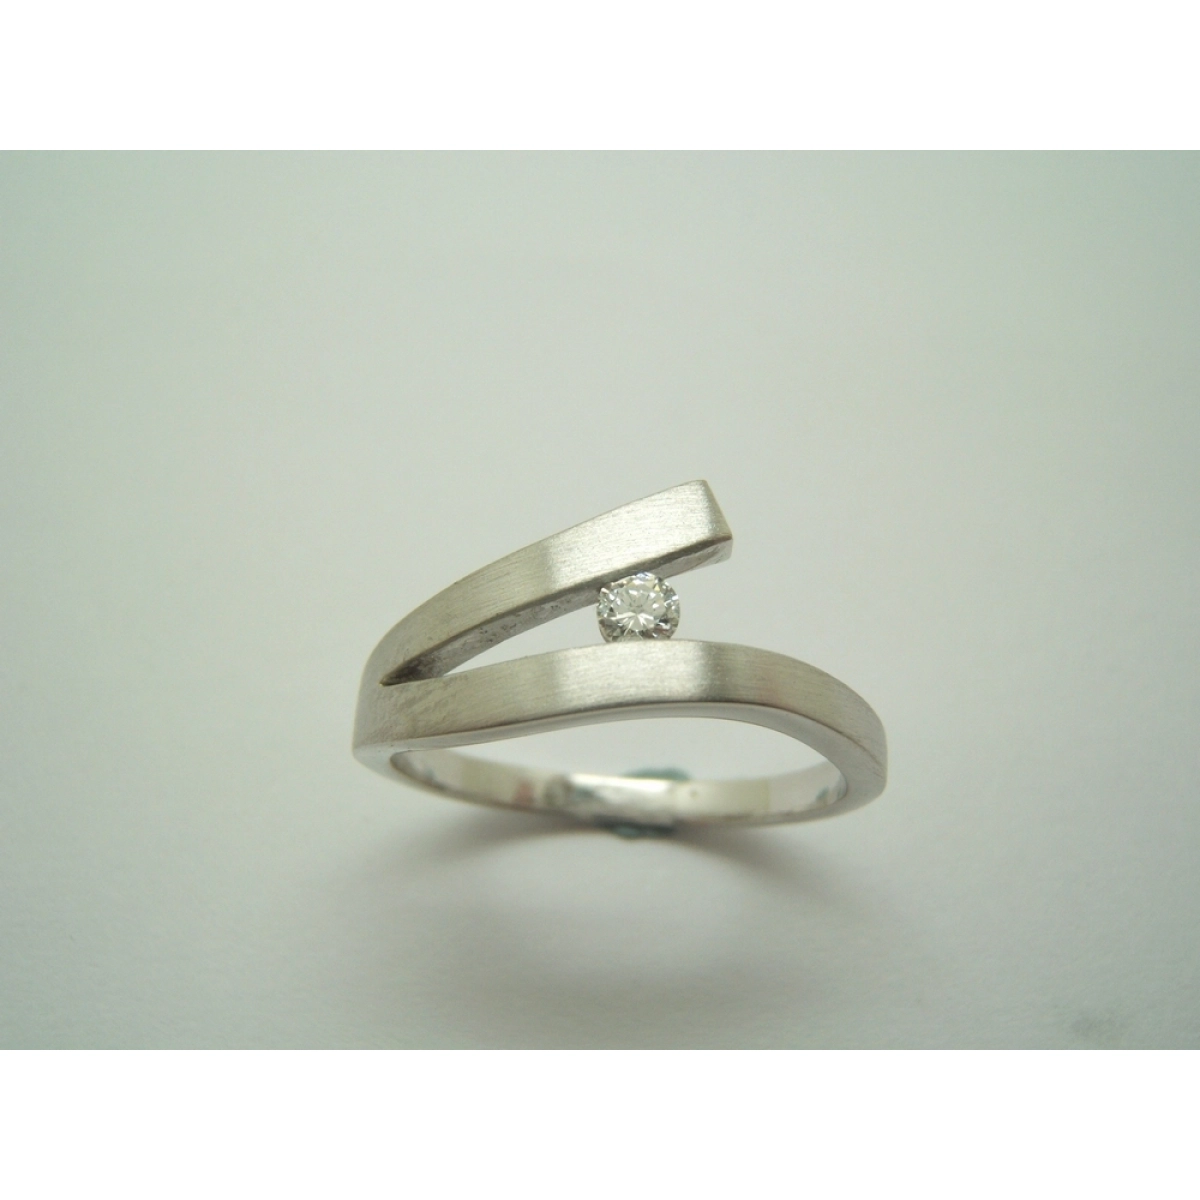 RING SOLITAIRE WHITE GOLD AND DIAMOND B-79